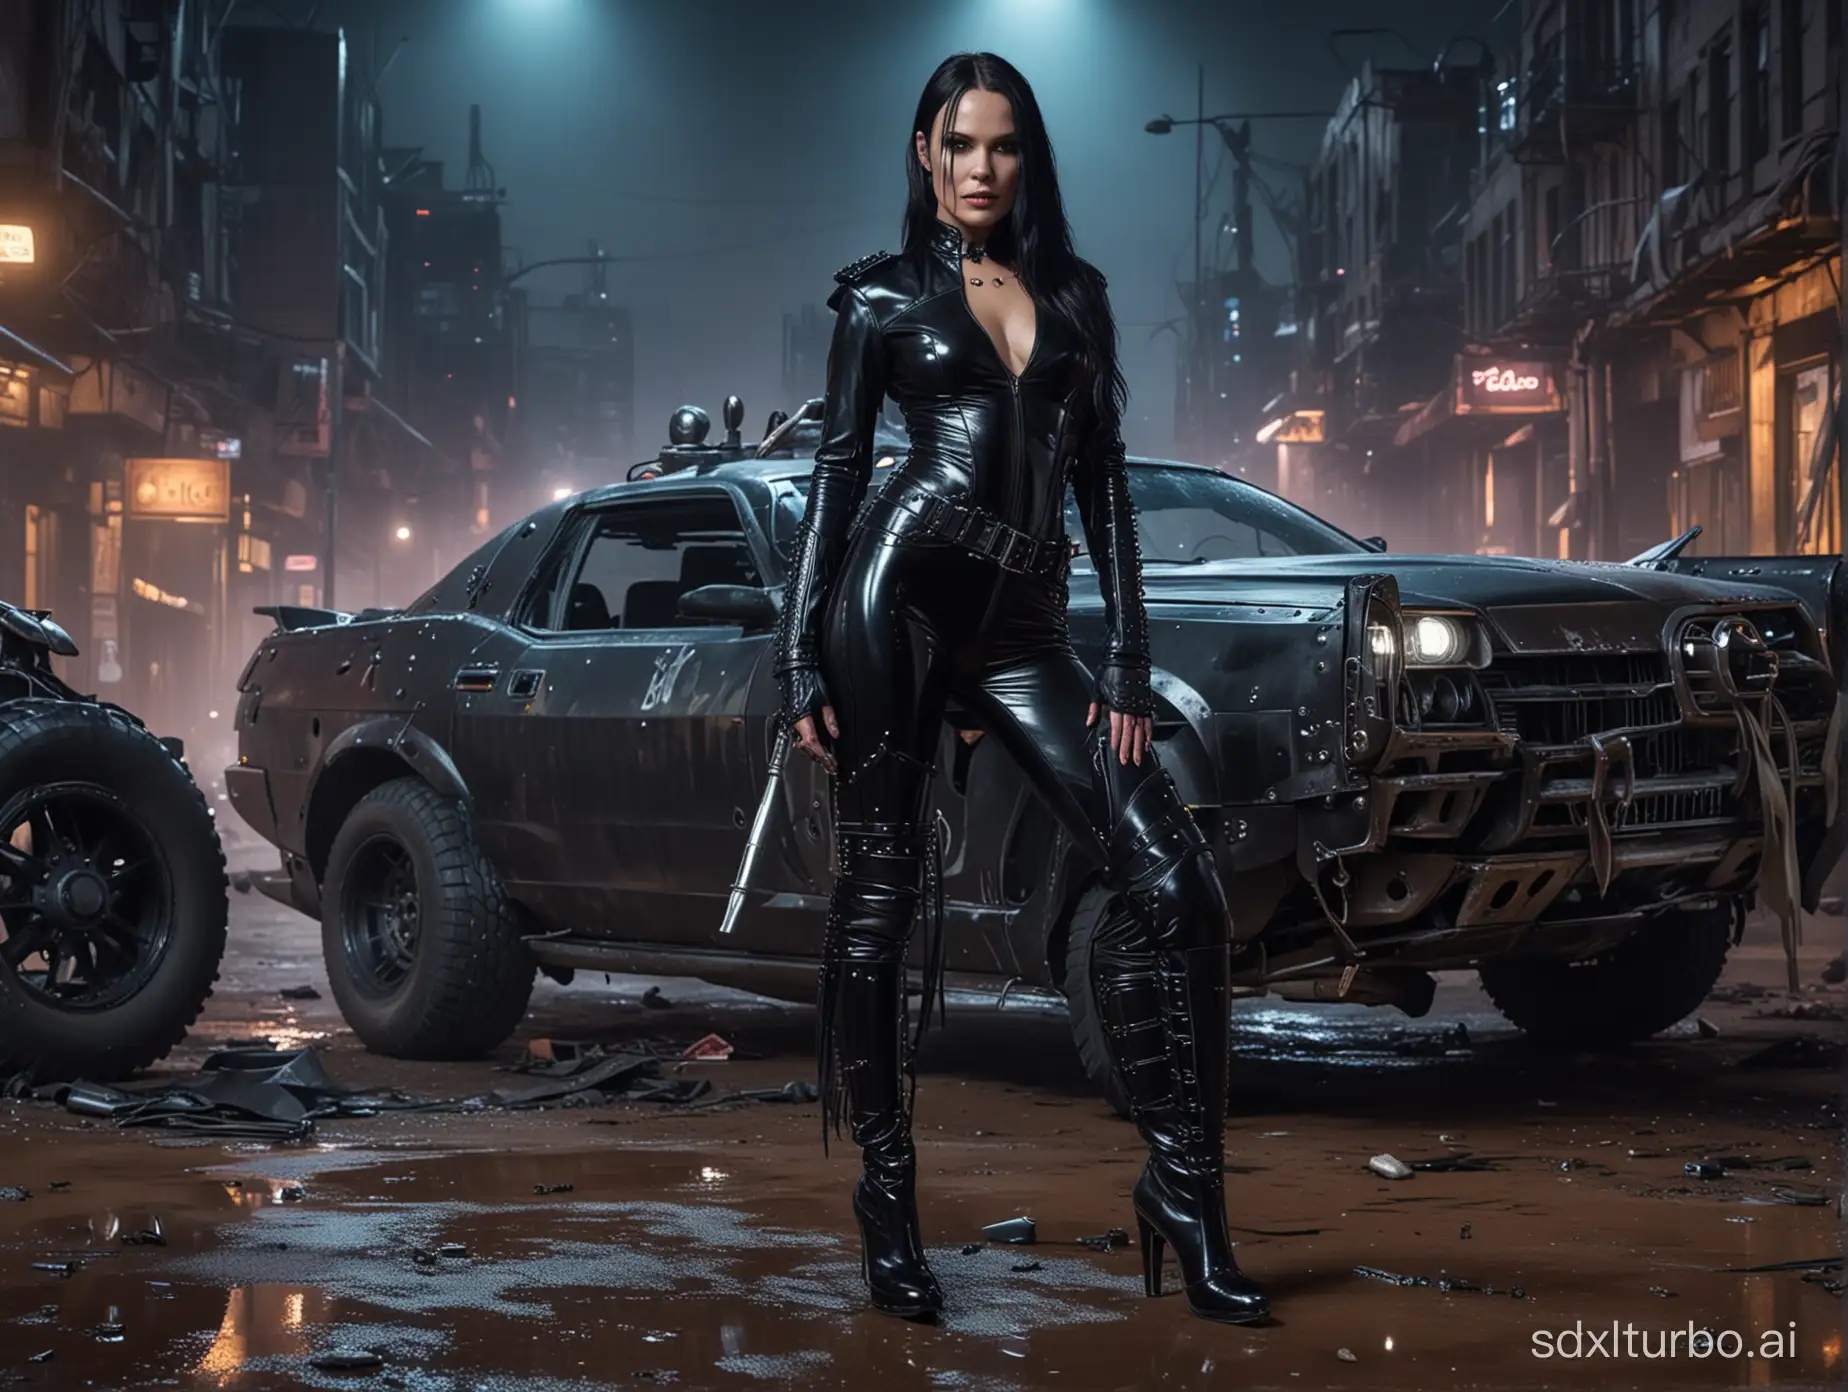 detailed HD photo, full-length framing, cyberpunk police woman Tarja Turunen standing, wearing black low-cut shiny PVC catsuit, wearing long shiny PVC gloves, wearing shiny PVC thigh-high boots, spikes and studs, in a destroyed cyberpunk city at night with a Mad Max car, illuminated by neons